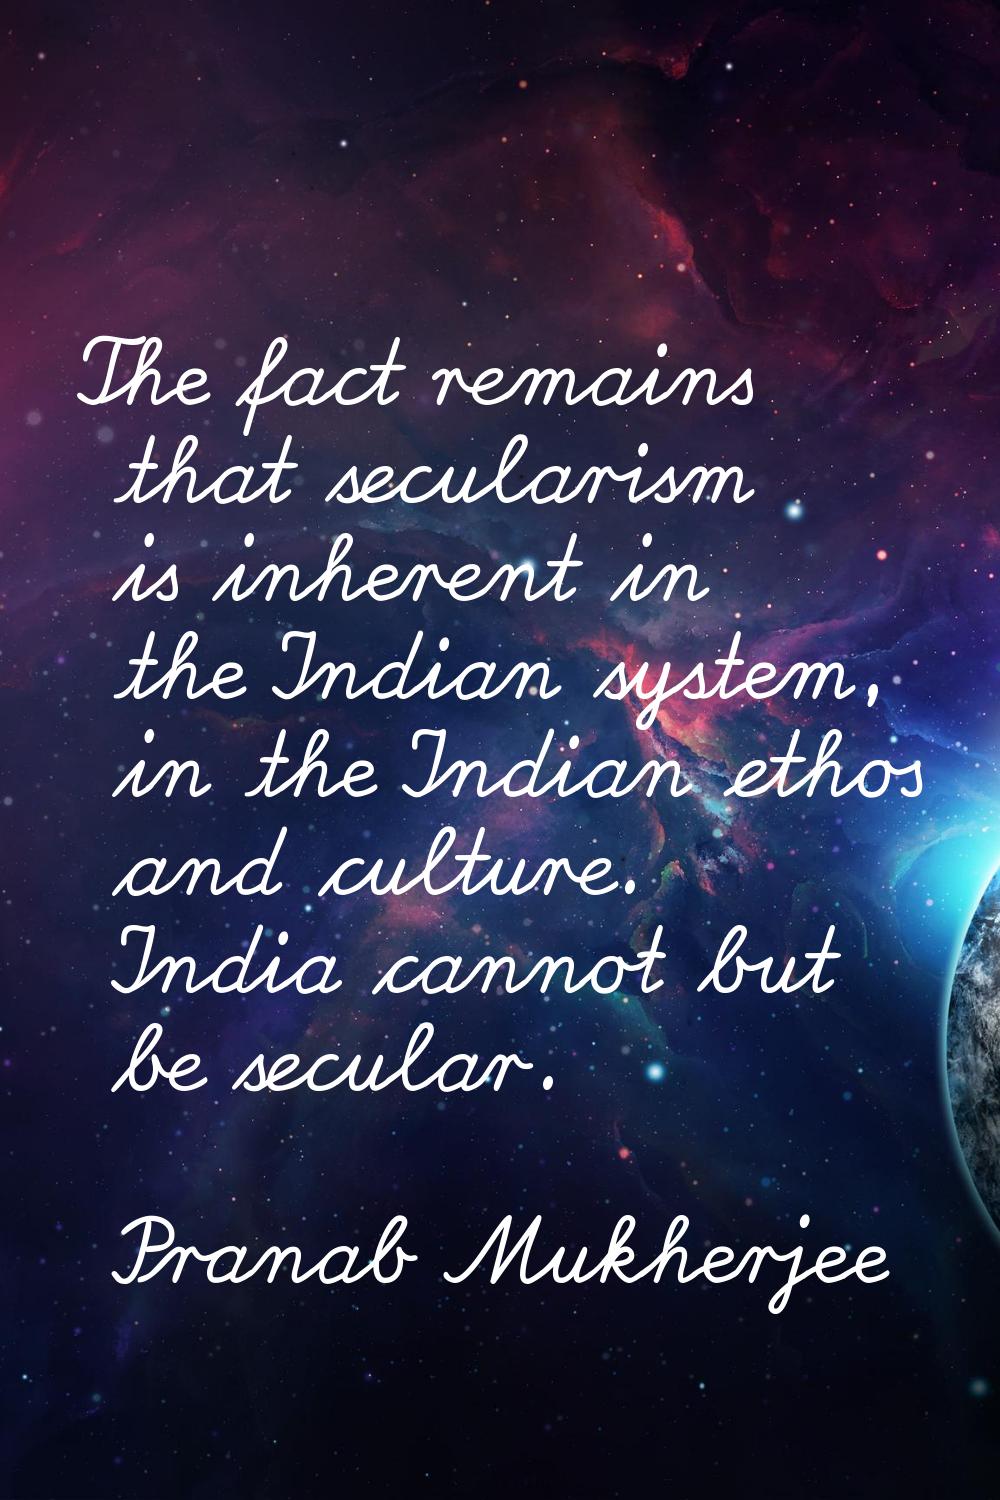 The fact remains that secularism is inherent in the Indian system, in the Indian ethos and culture.